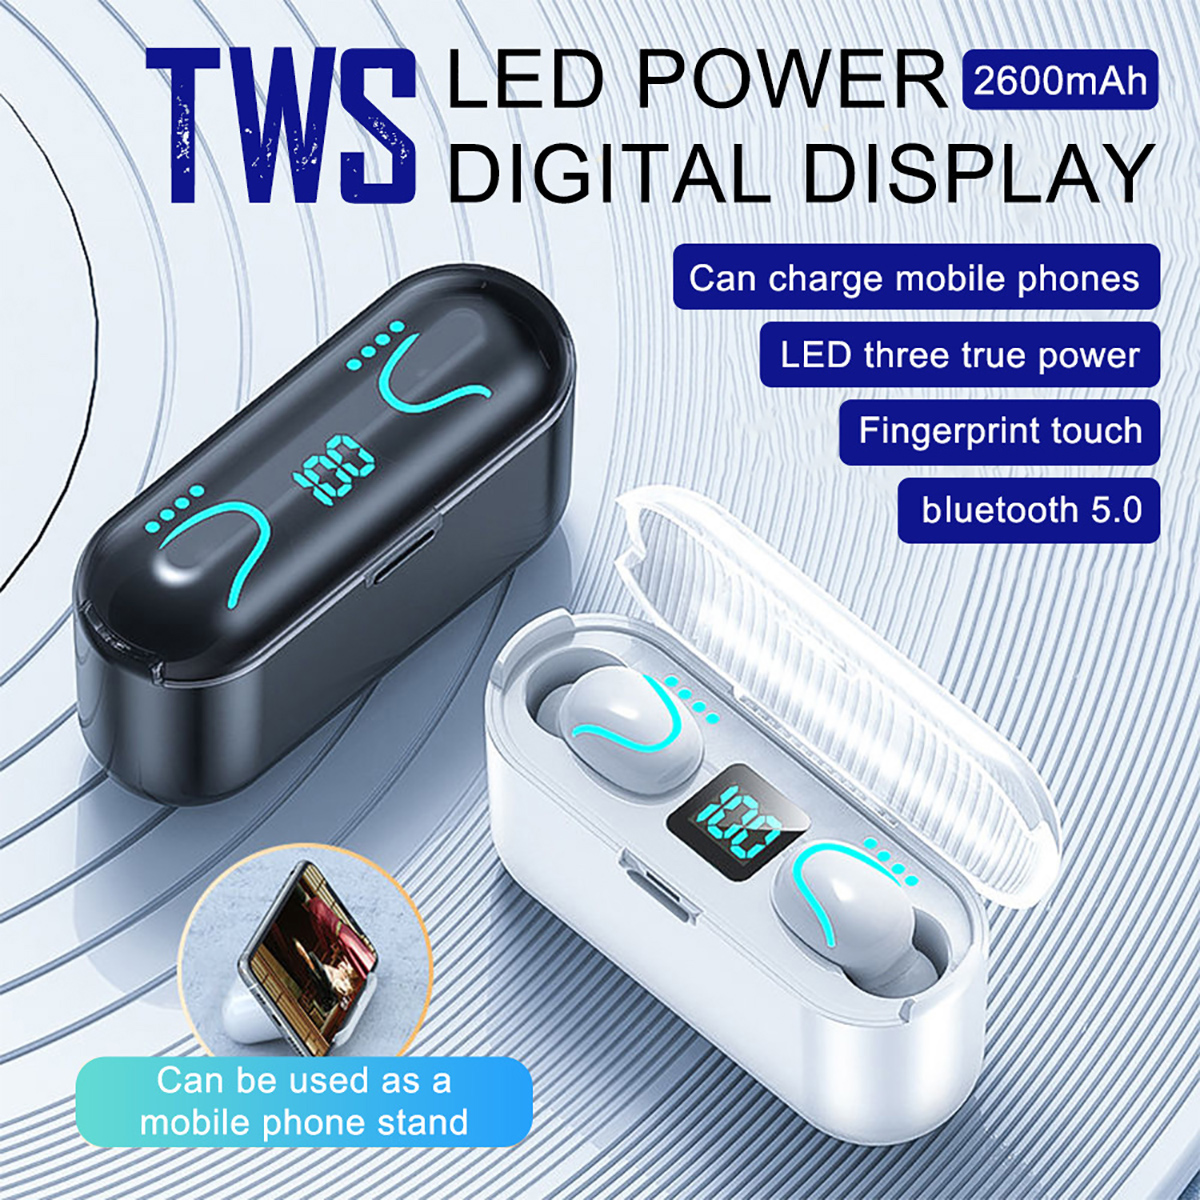 Bakeey-A13-TWS-bluetooth-Earbuds-LED-Display-Fingerprint-Touch-Sport-Headset-Noise-Cancelling-HIFI-B-1747841-1